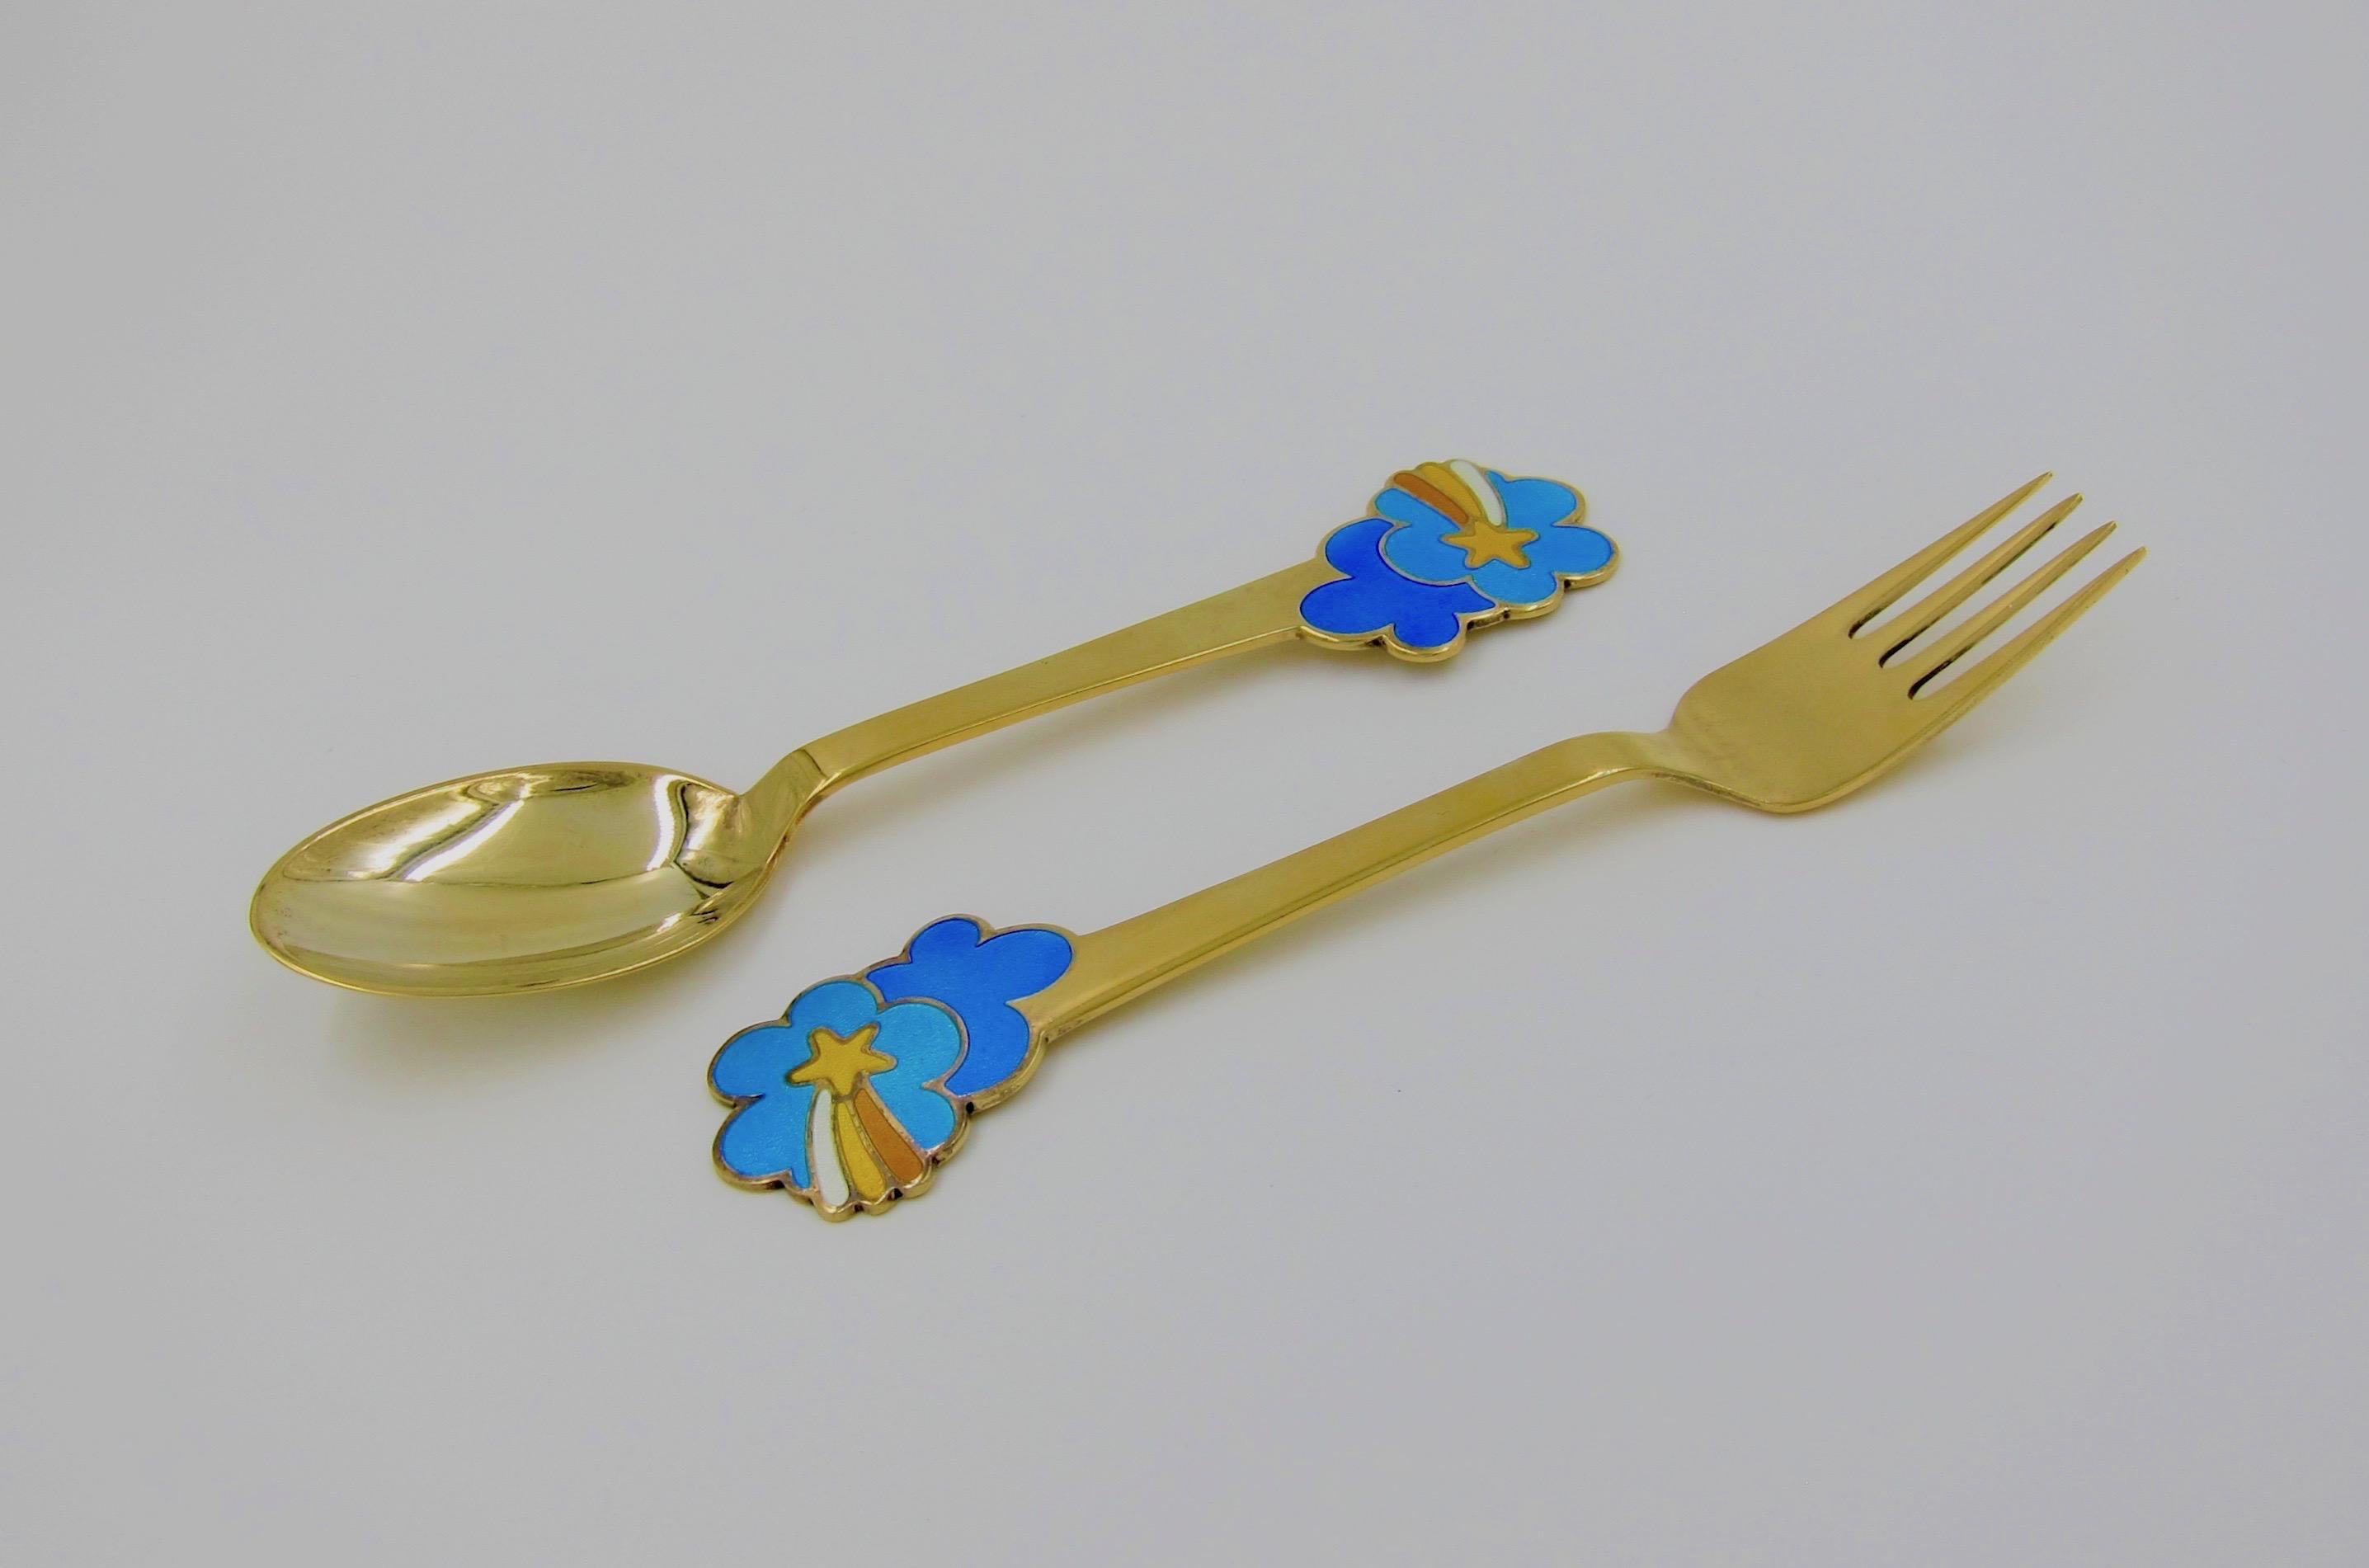 Late 20th Century 1975 Anton Michelsen Gilded Silver and Enamel Christmas Fork and Spoon Set